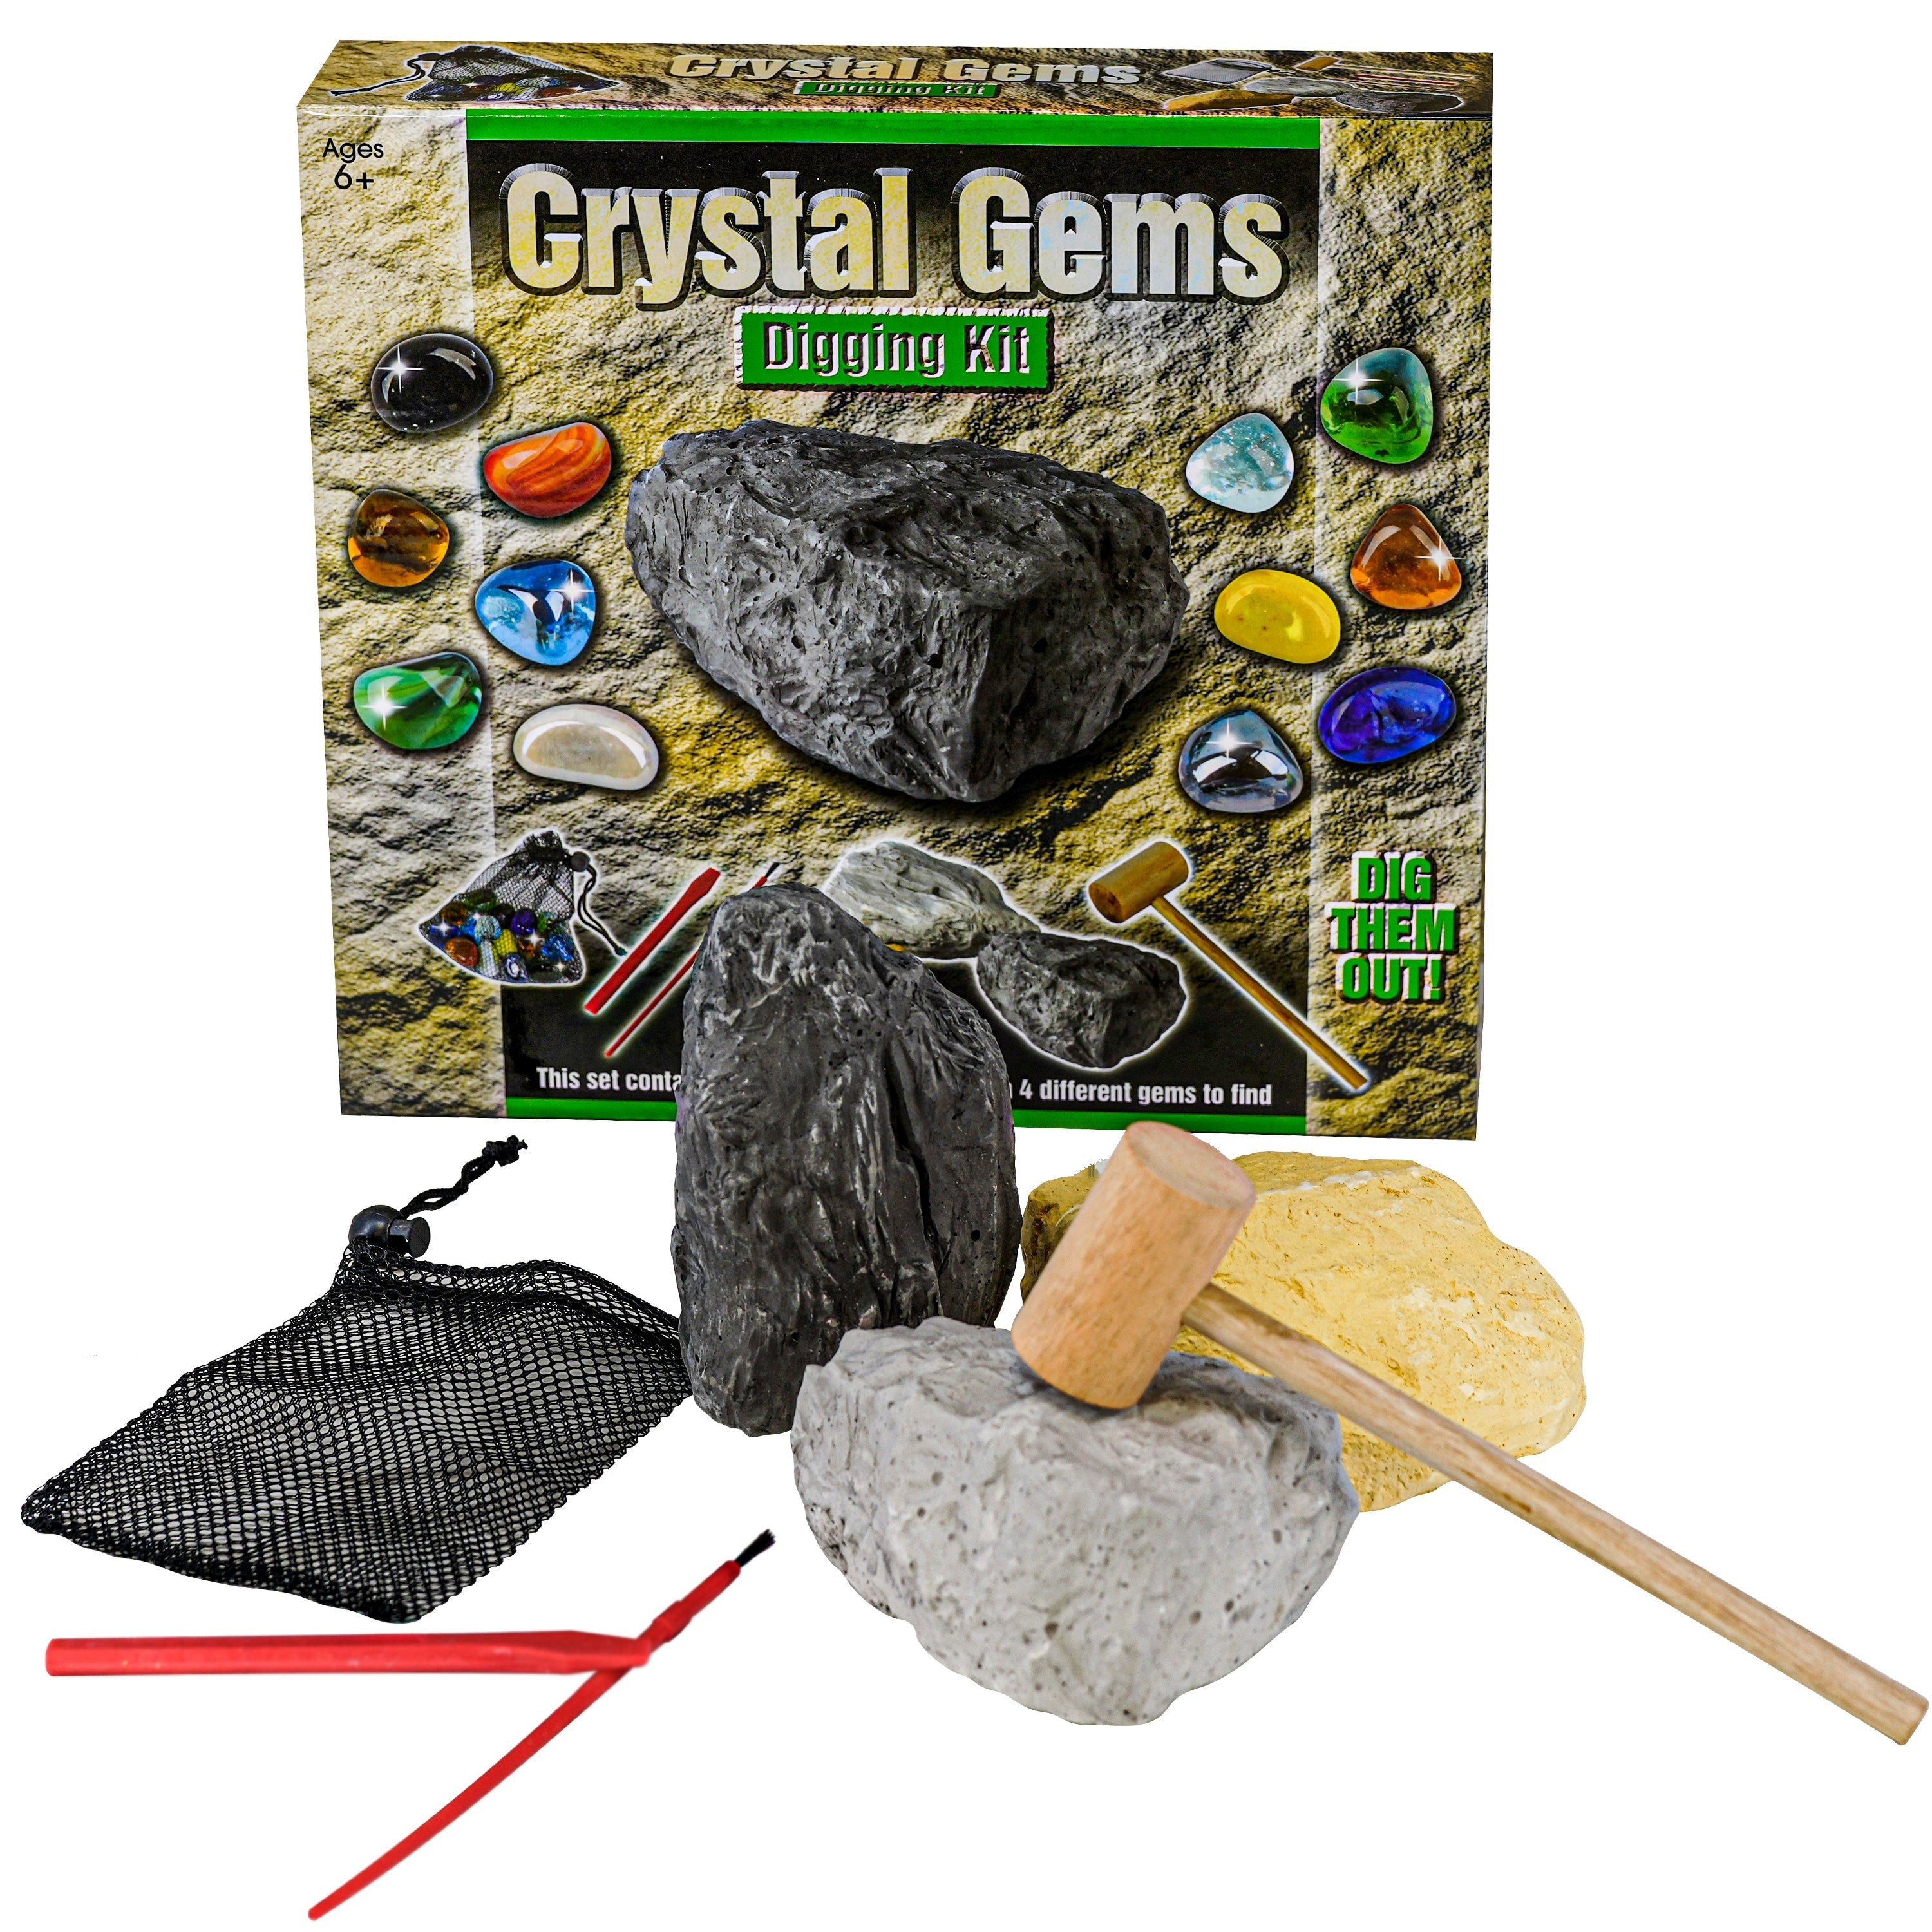 Crystal Gems Digging Kit The Magic Toy Shop - The Magic Toy Shop